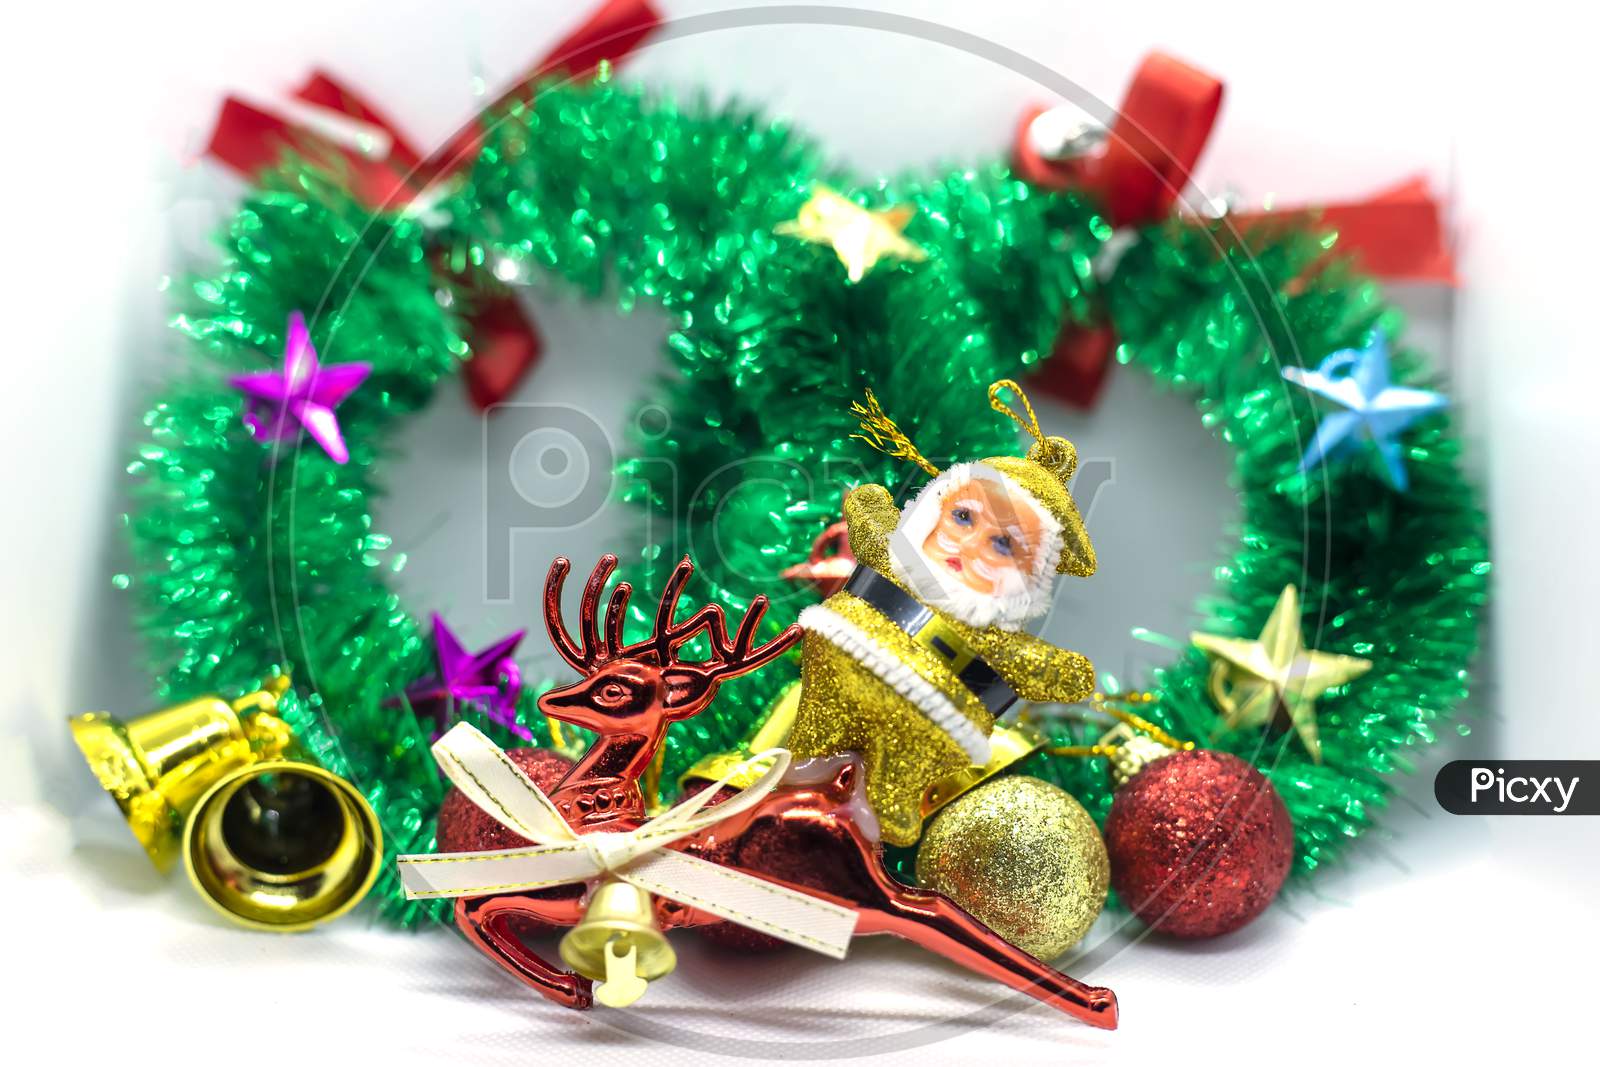 Santa On A Reindeer With A Christmas Wreath Decorated With Ornaments Background